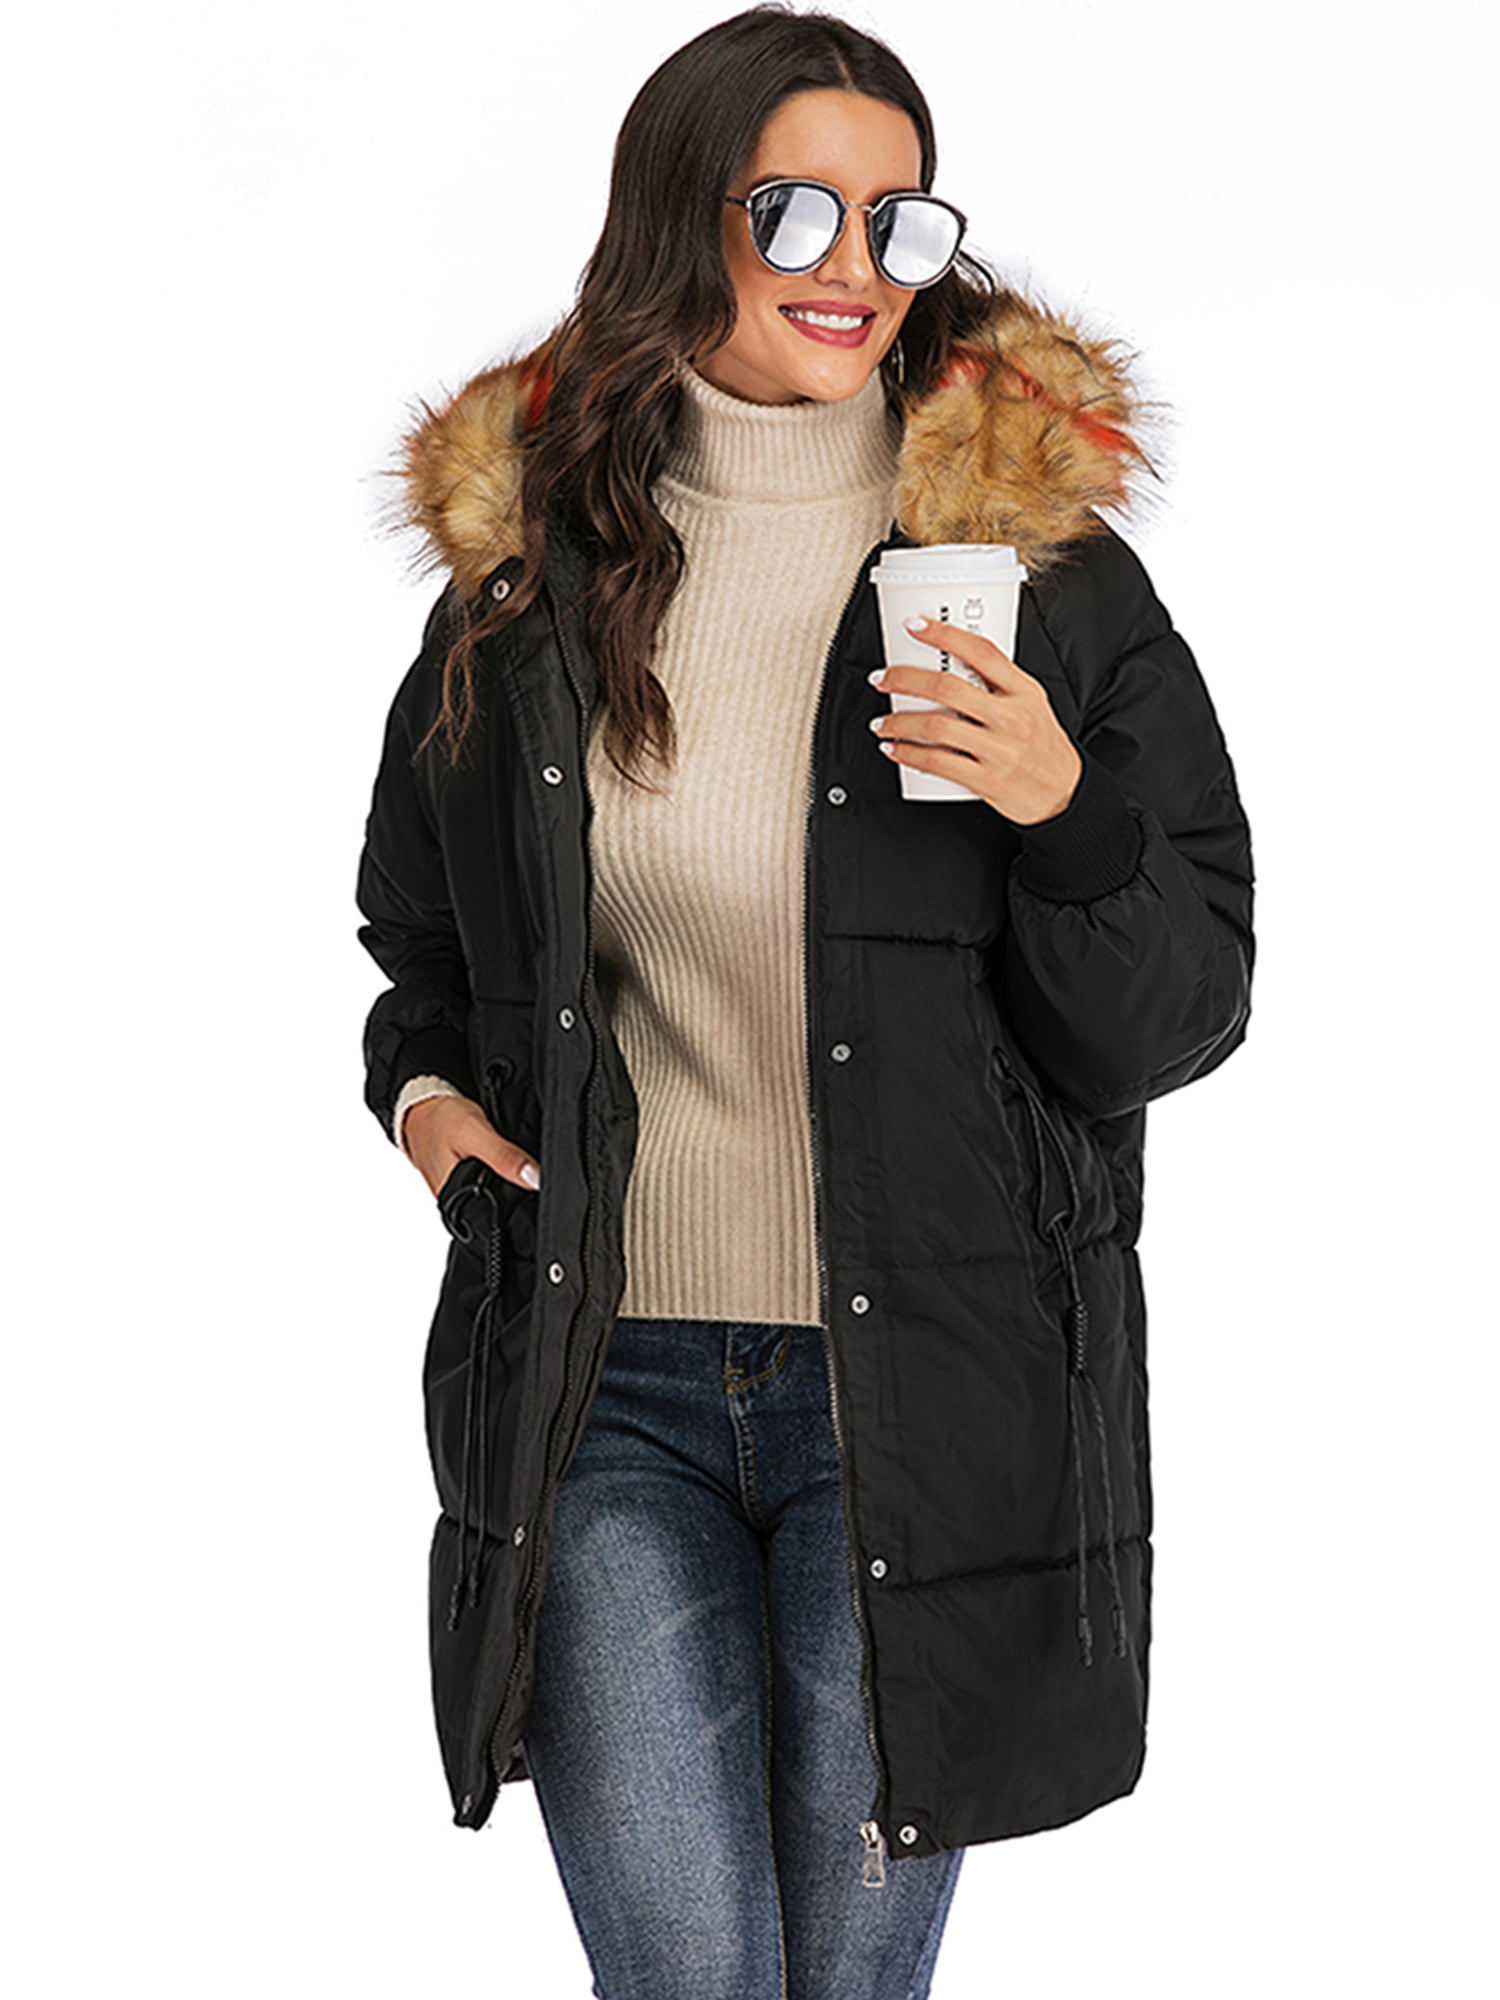 Women's Lined Hooded Thickened Winter Parka Jacket Long Outwear ...